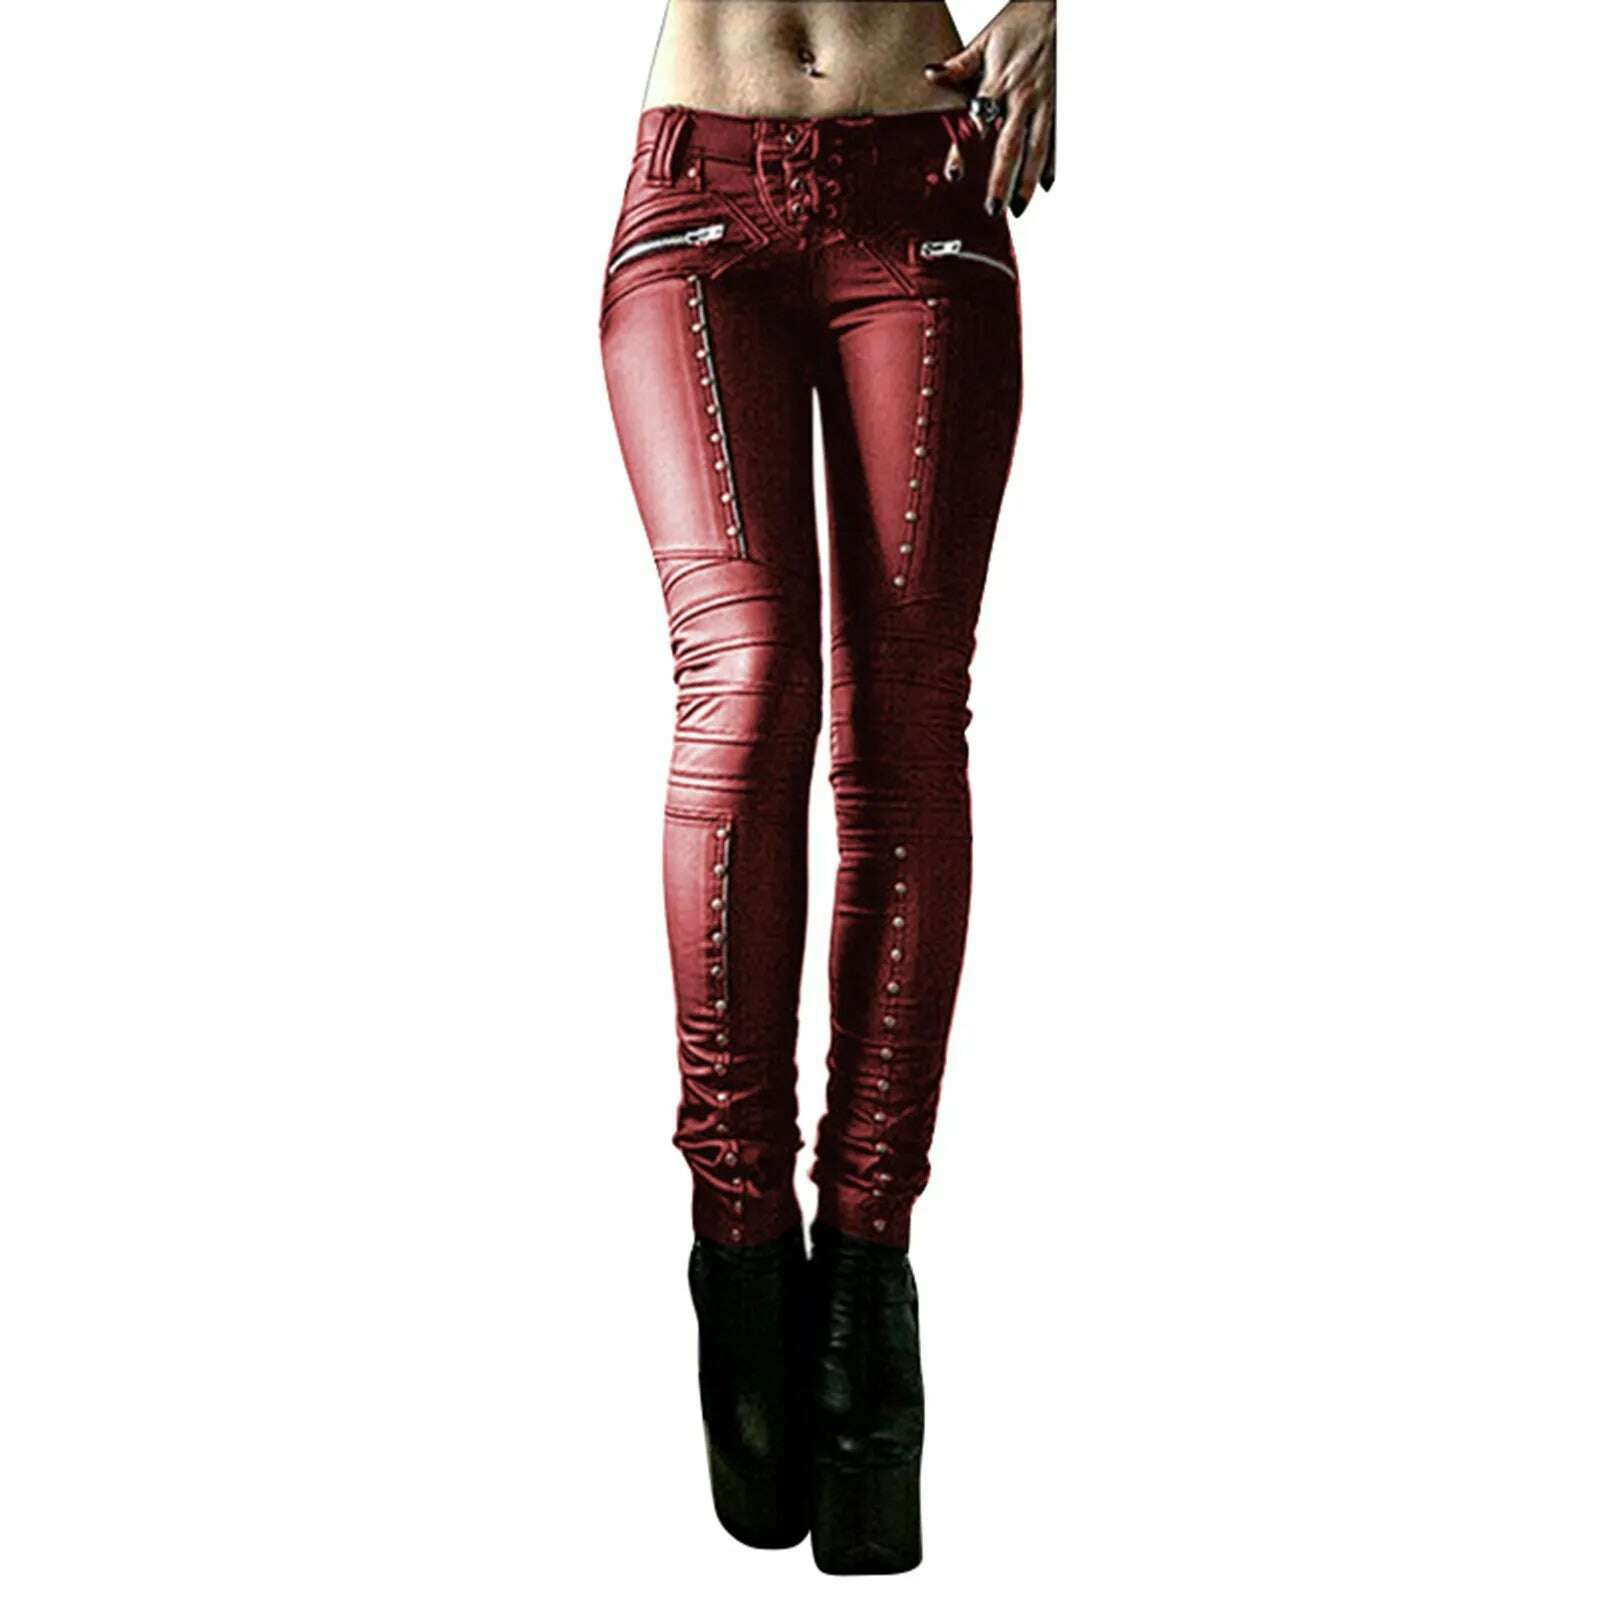 KIMLUD, Women Retro PU Pants Leather steampunk Rivet Zipper Lace up Pencil pants Medieval Gothic Skinny Streetwear Autumn Casual Trouse, Red2 / S, KIMLUD Women's Clothes